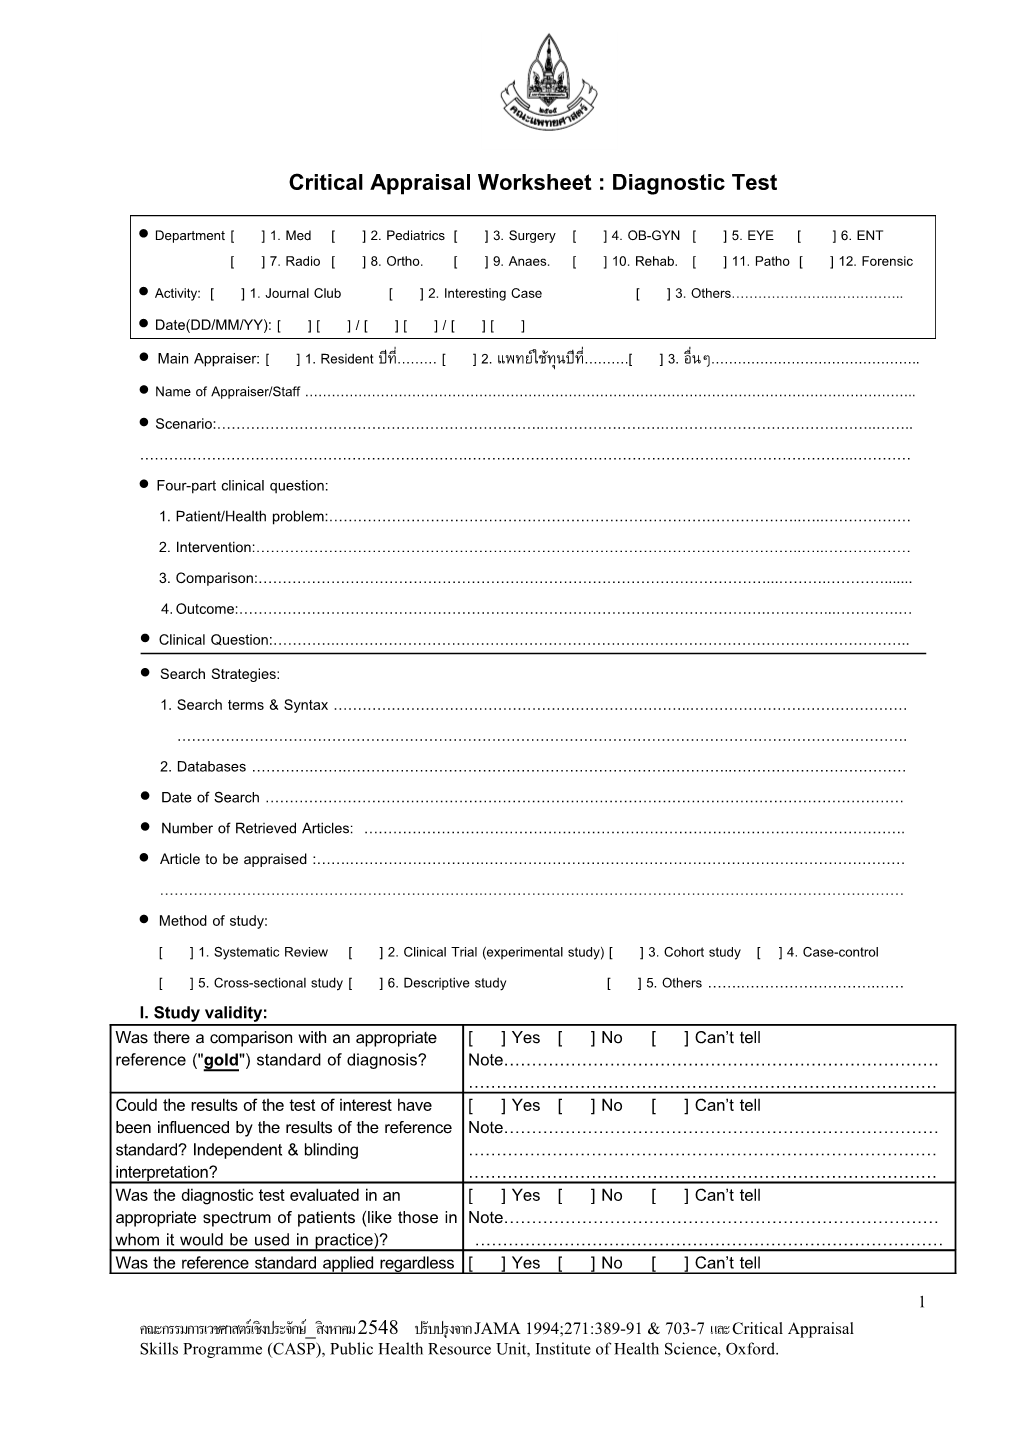 Critical Appraisal Worksheet for Diagnosis